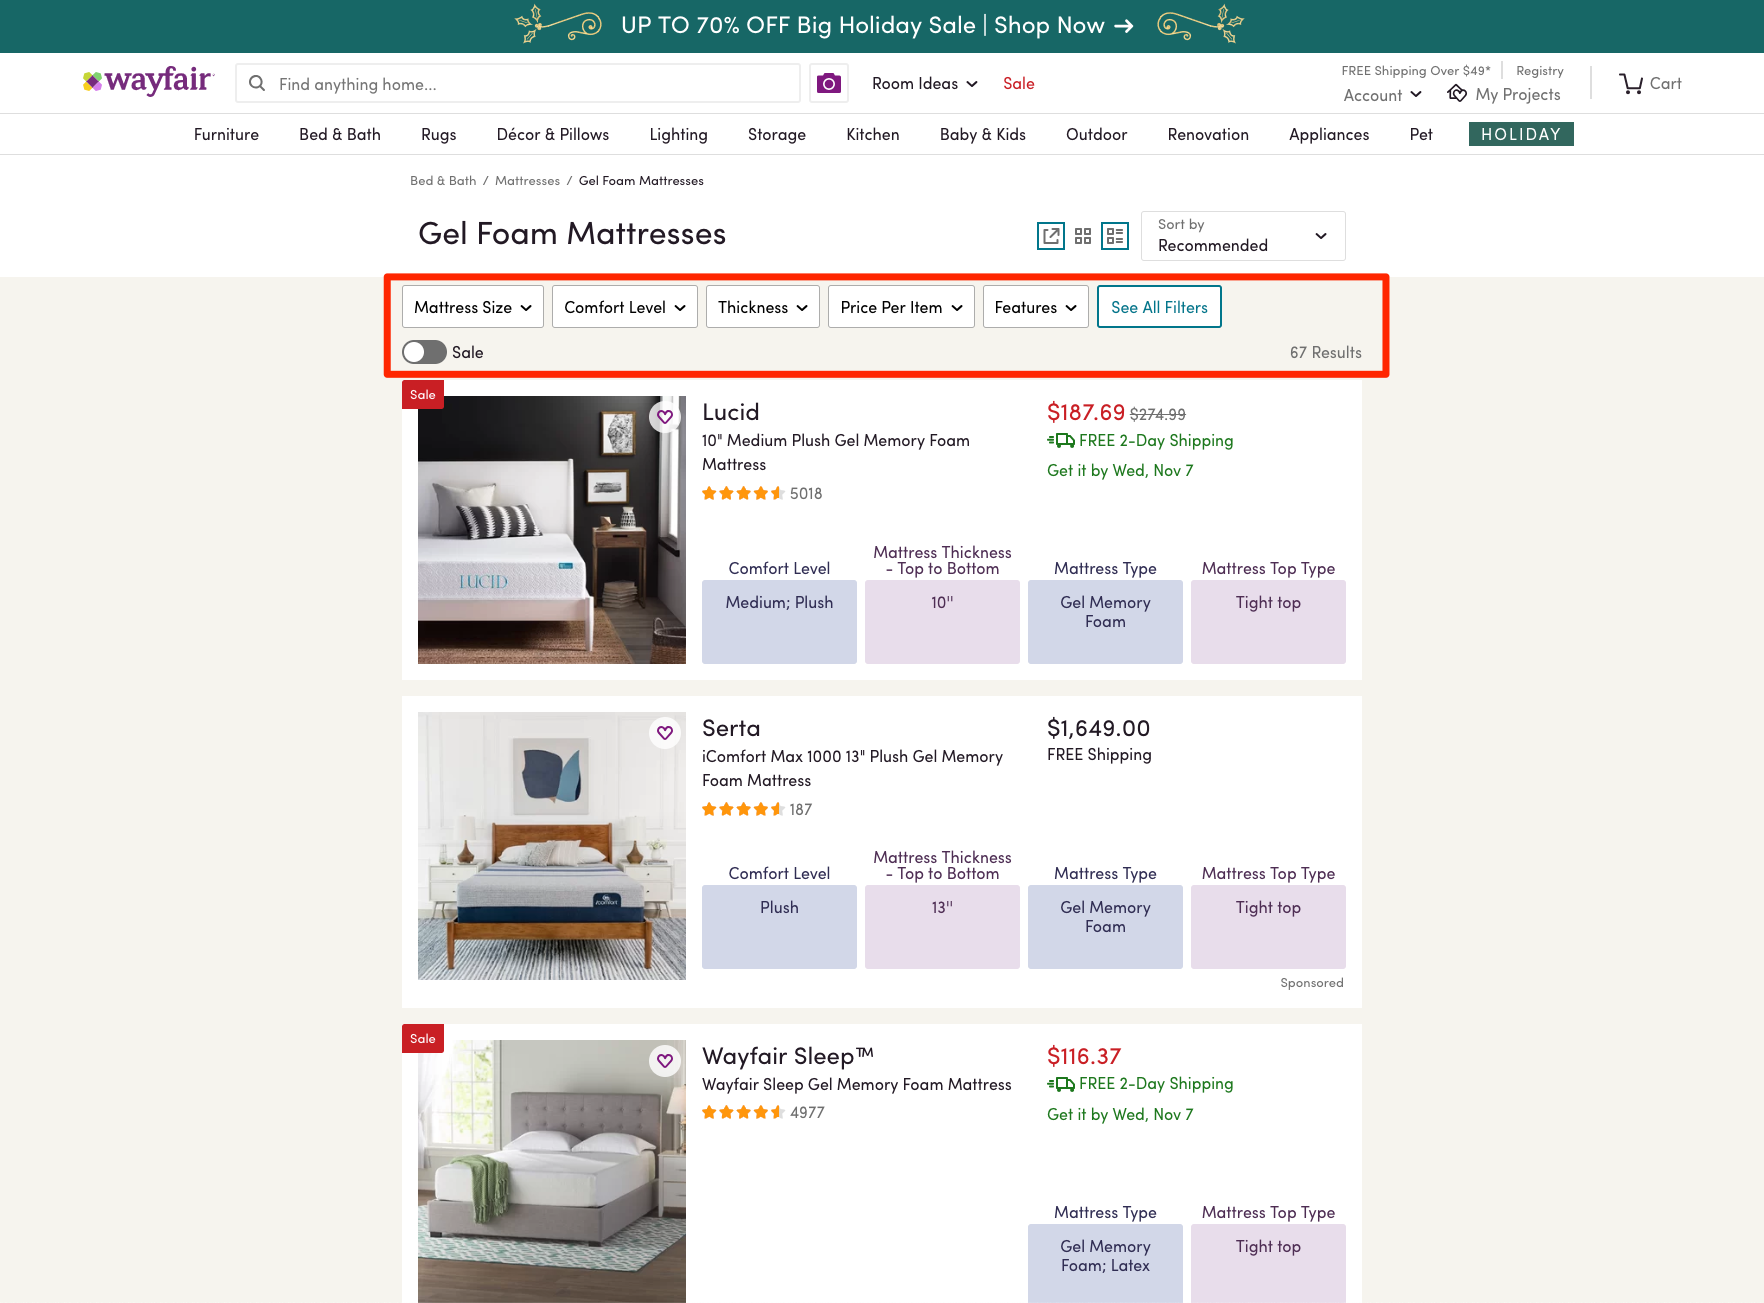 Wayfair has a greater selection of furniture and far more filtering options than Amazon.